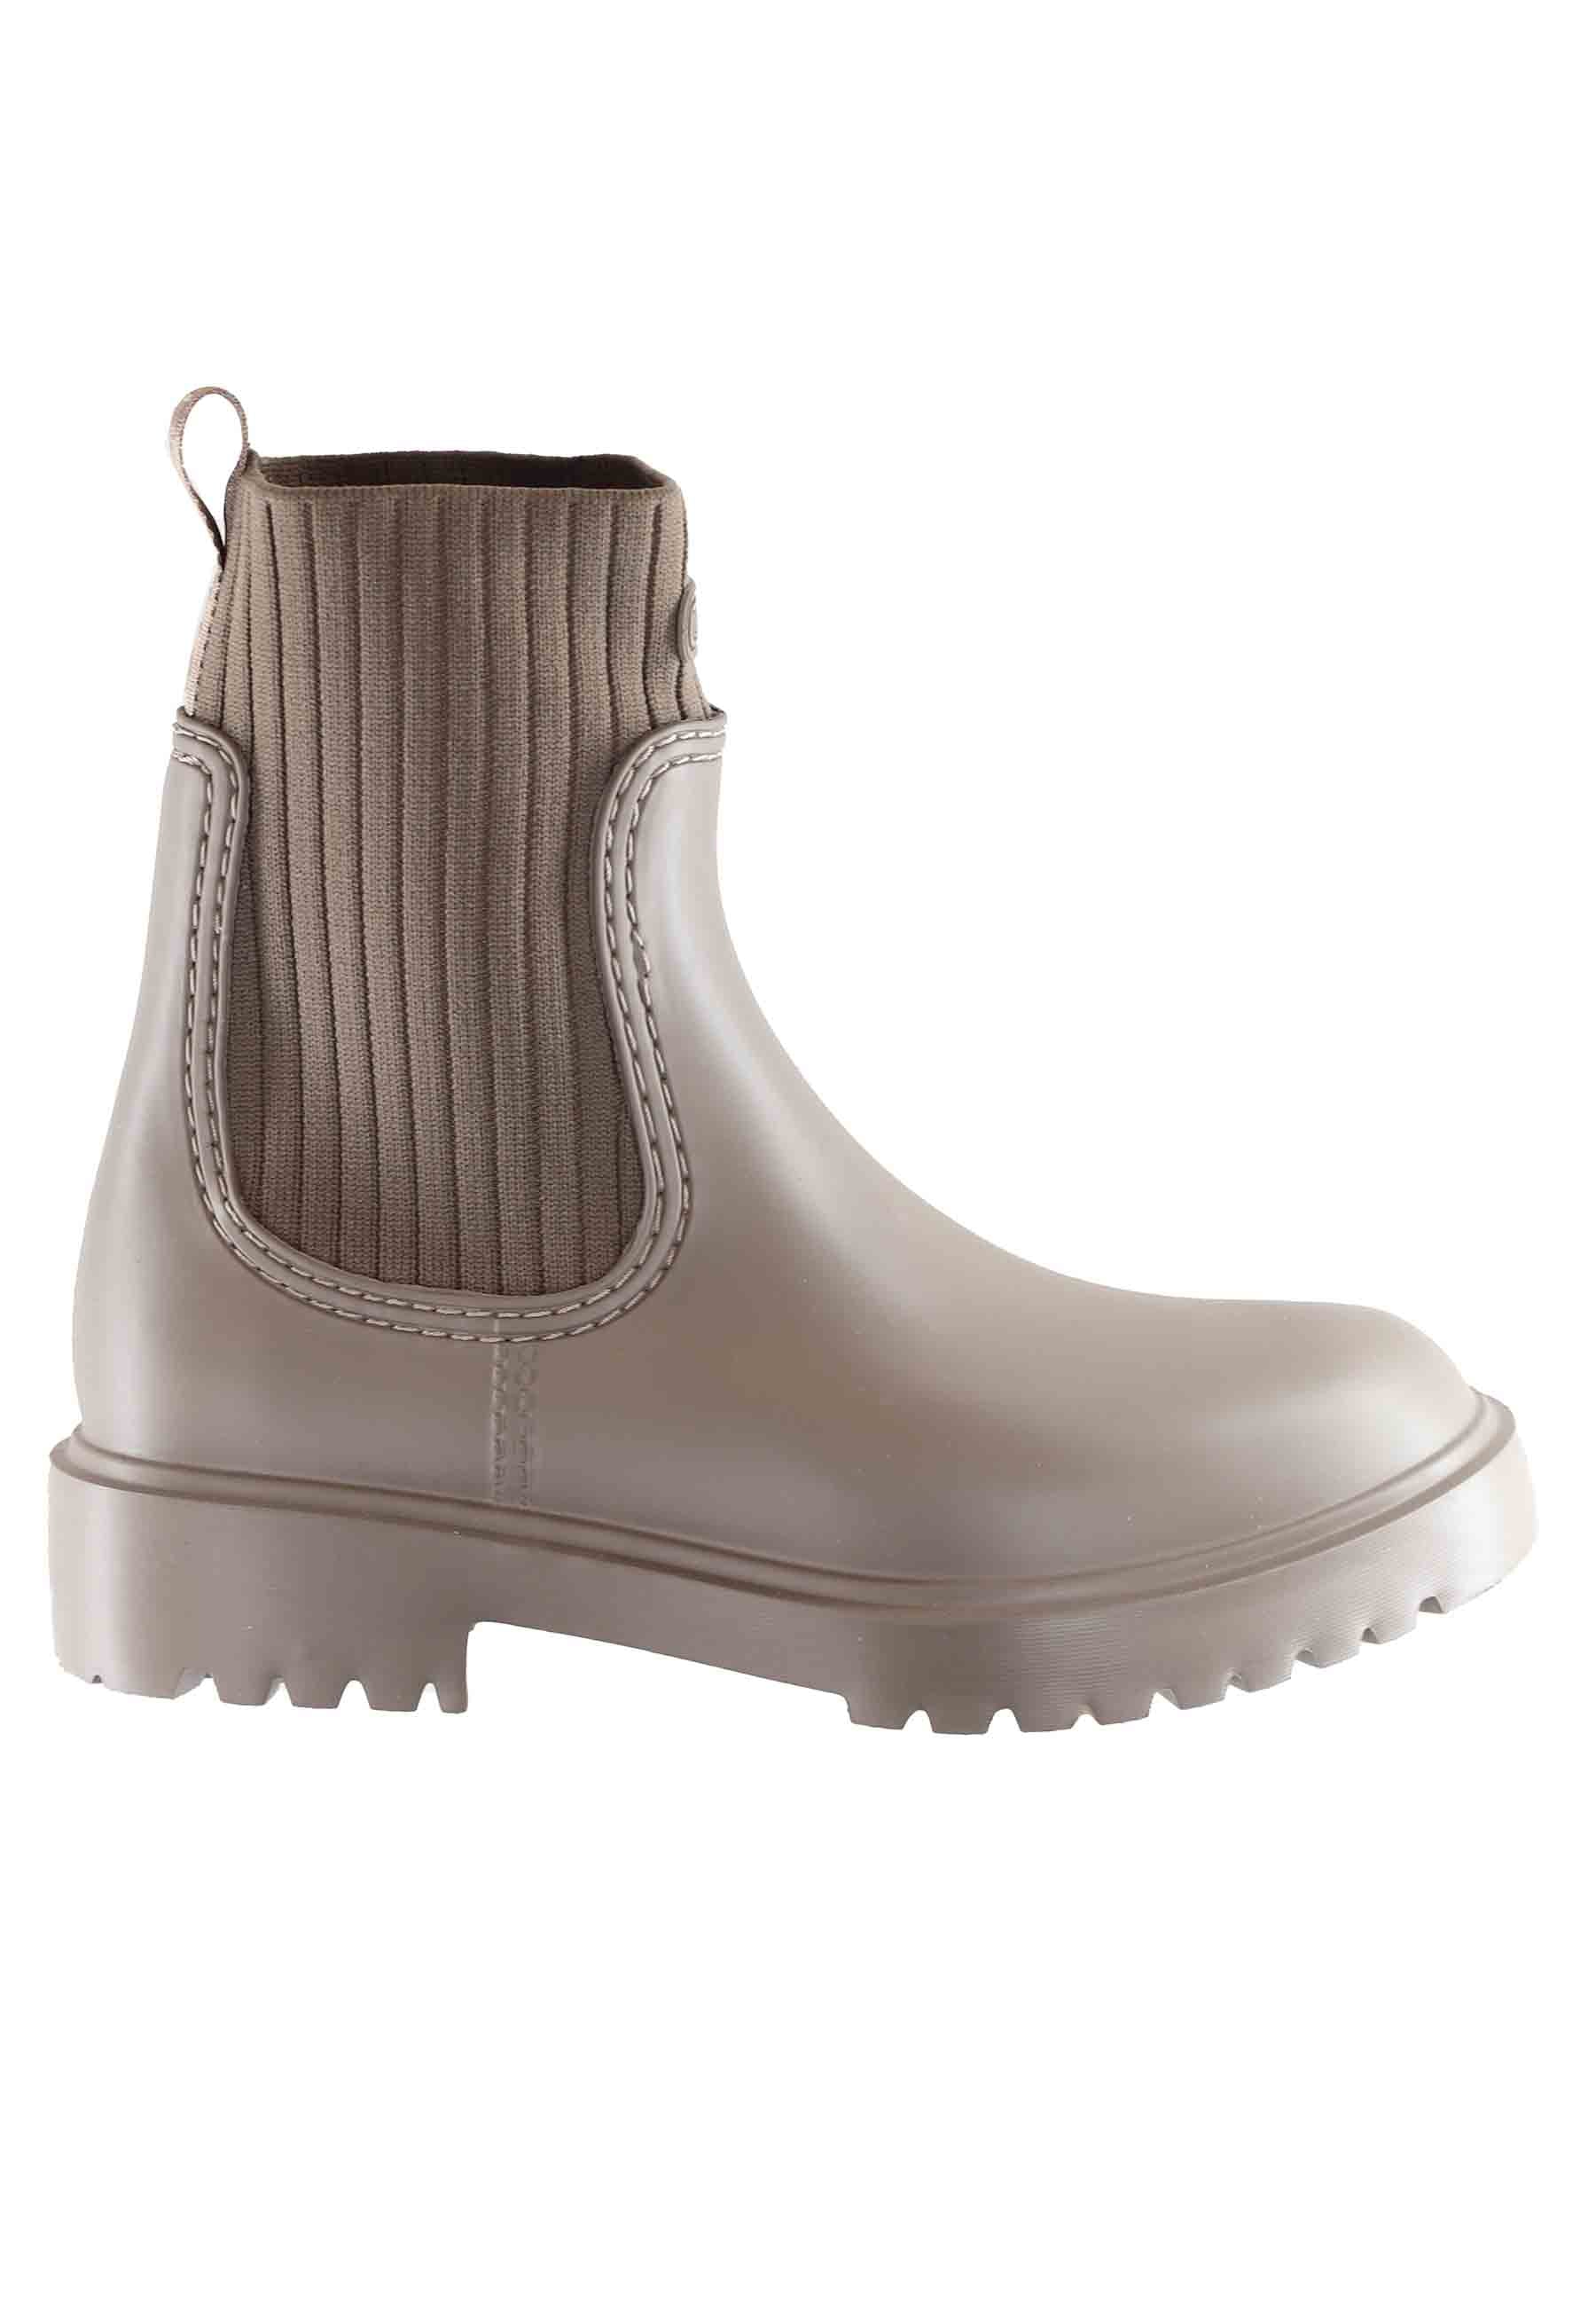 Women's rain boots in taupe PVC with side elastics